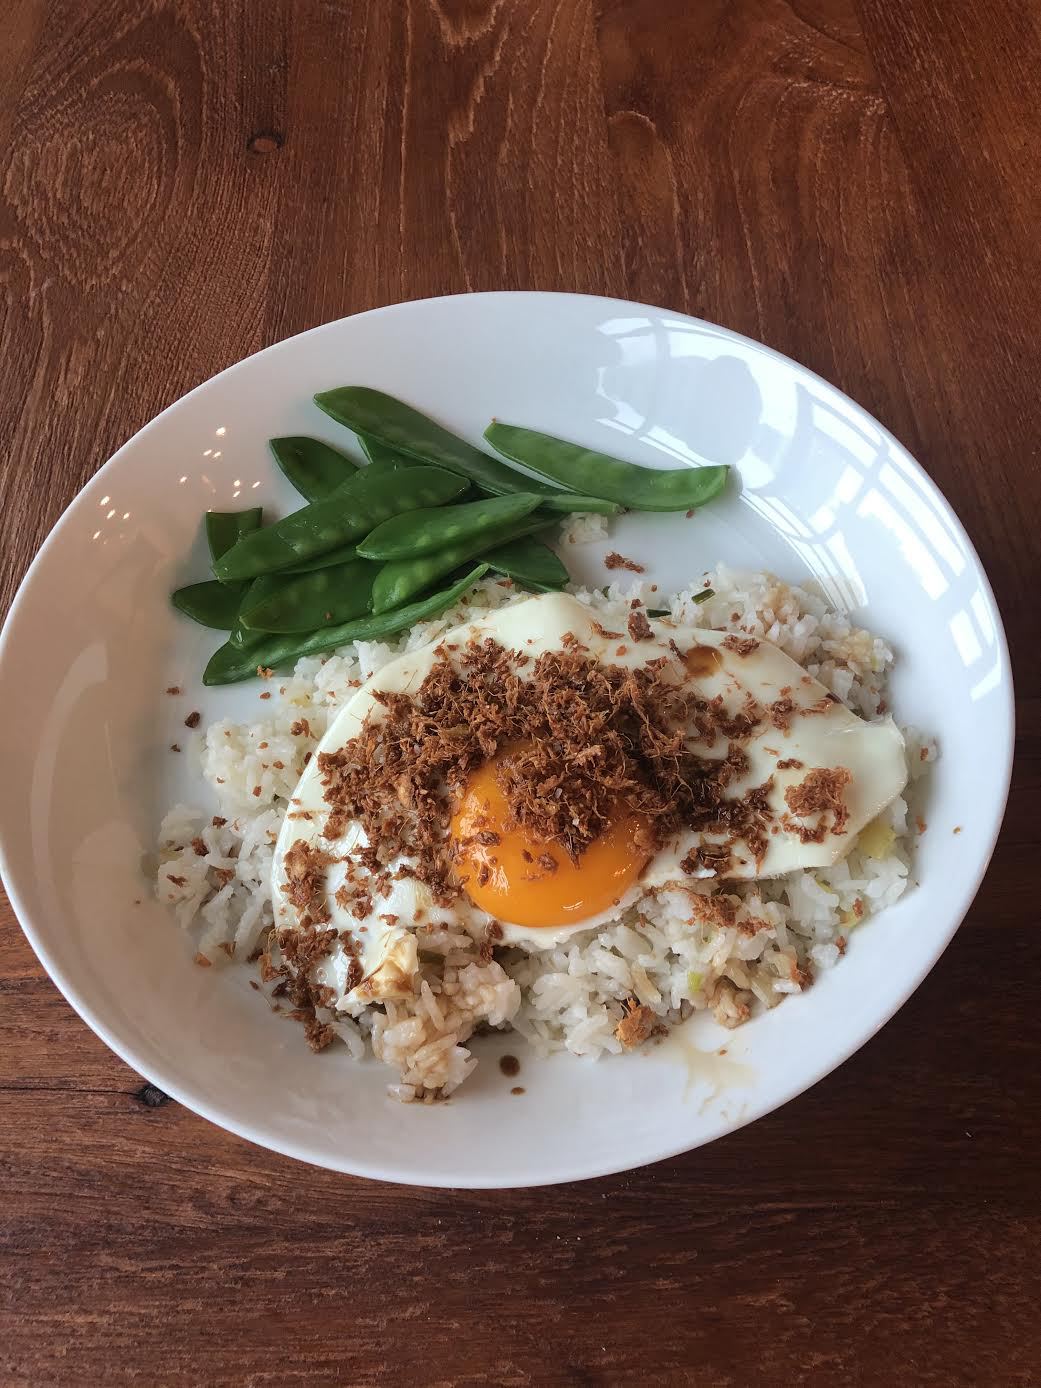 Fried Rice with Sunny-Side-Up Egg Topped with Crisped Ginger and Garlic